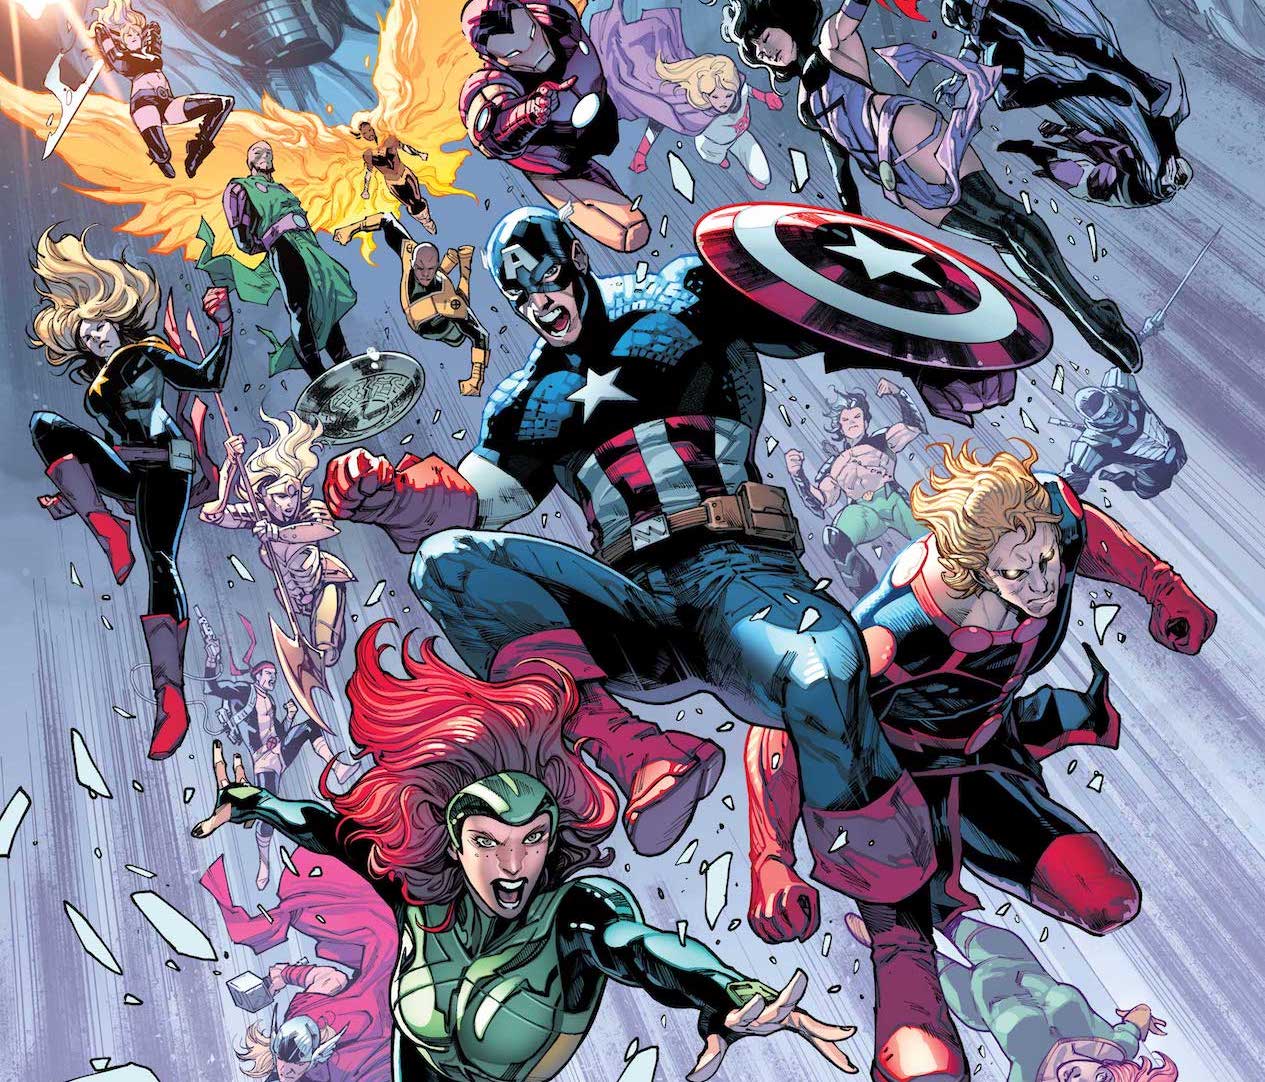 Marvel's 'Avengers/X-Men' Free Comic Book Day comic kicks off with 3 stories